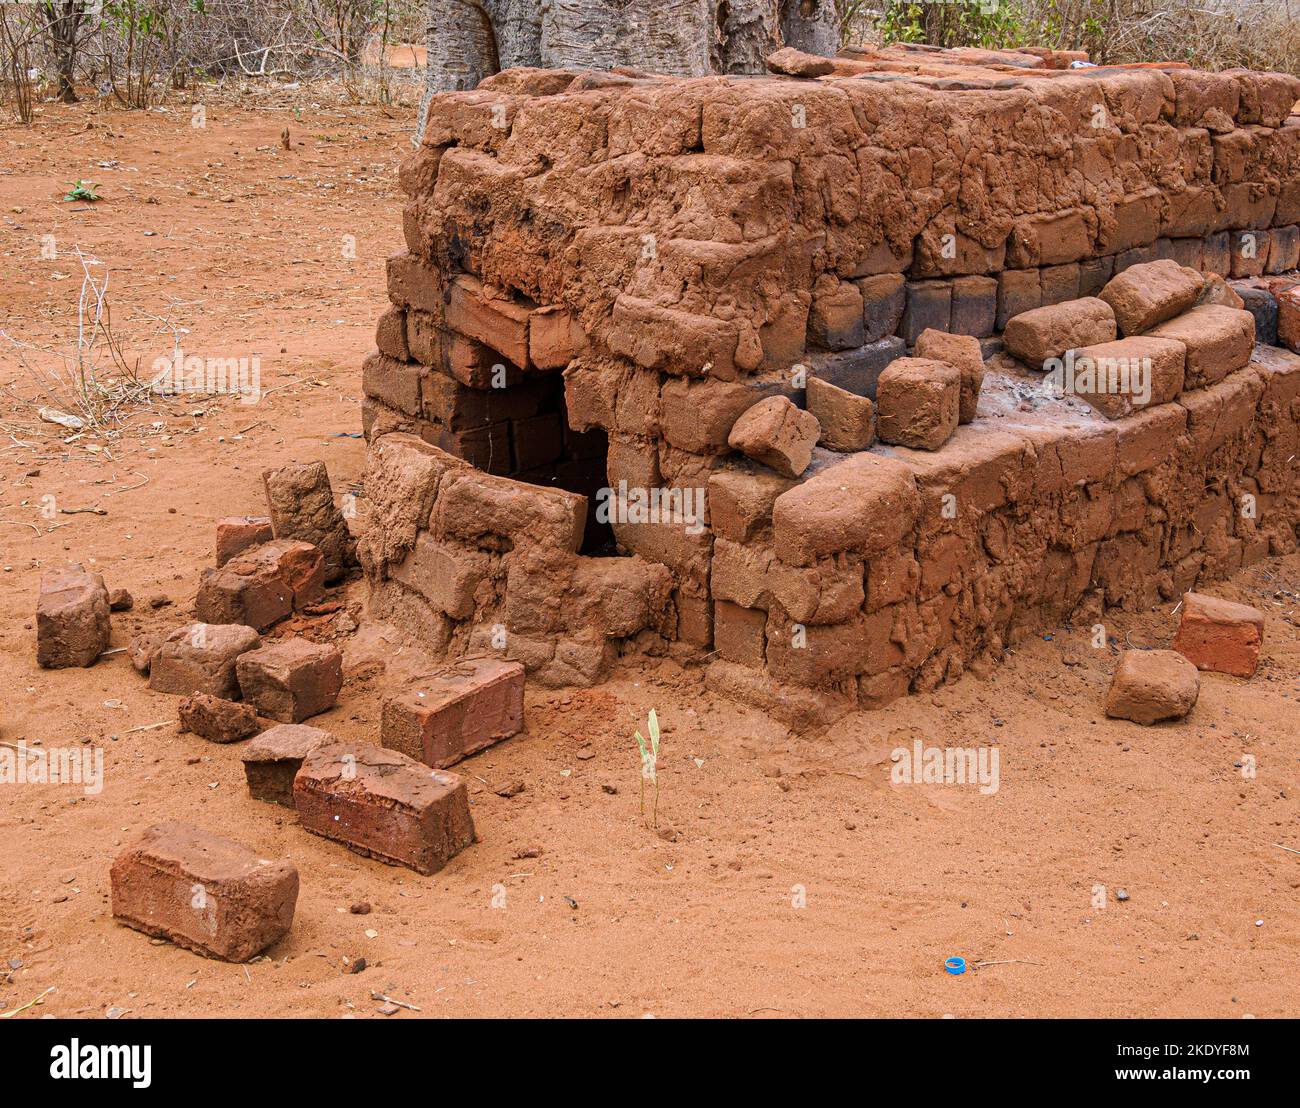 Primitive kiln used to fire bricks made from compressed earth and clay in Voi Southern Kenya Stock Photo